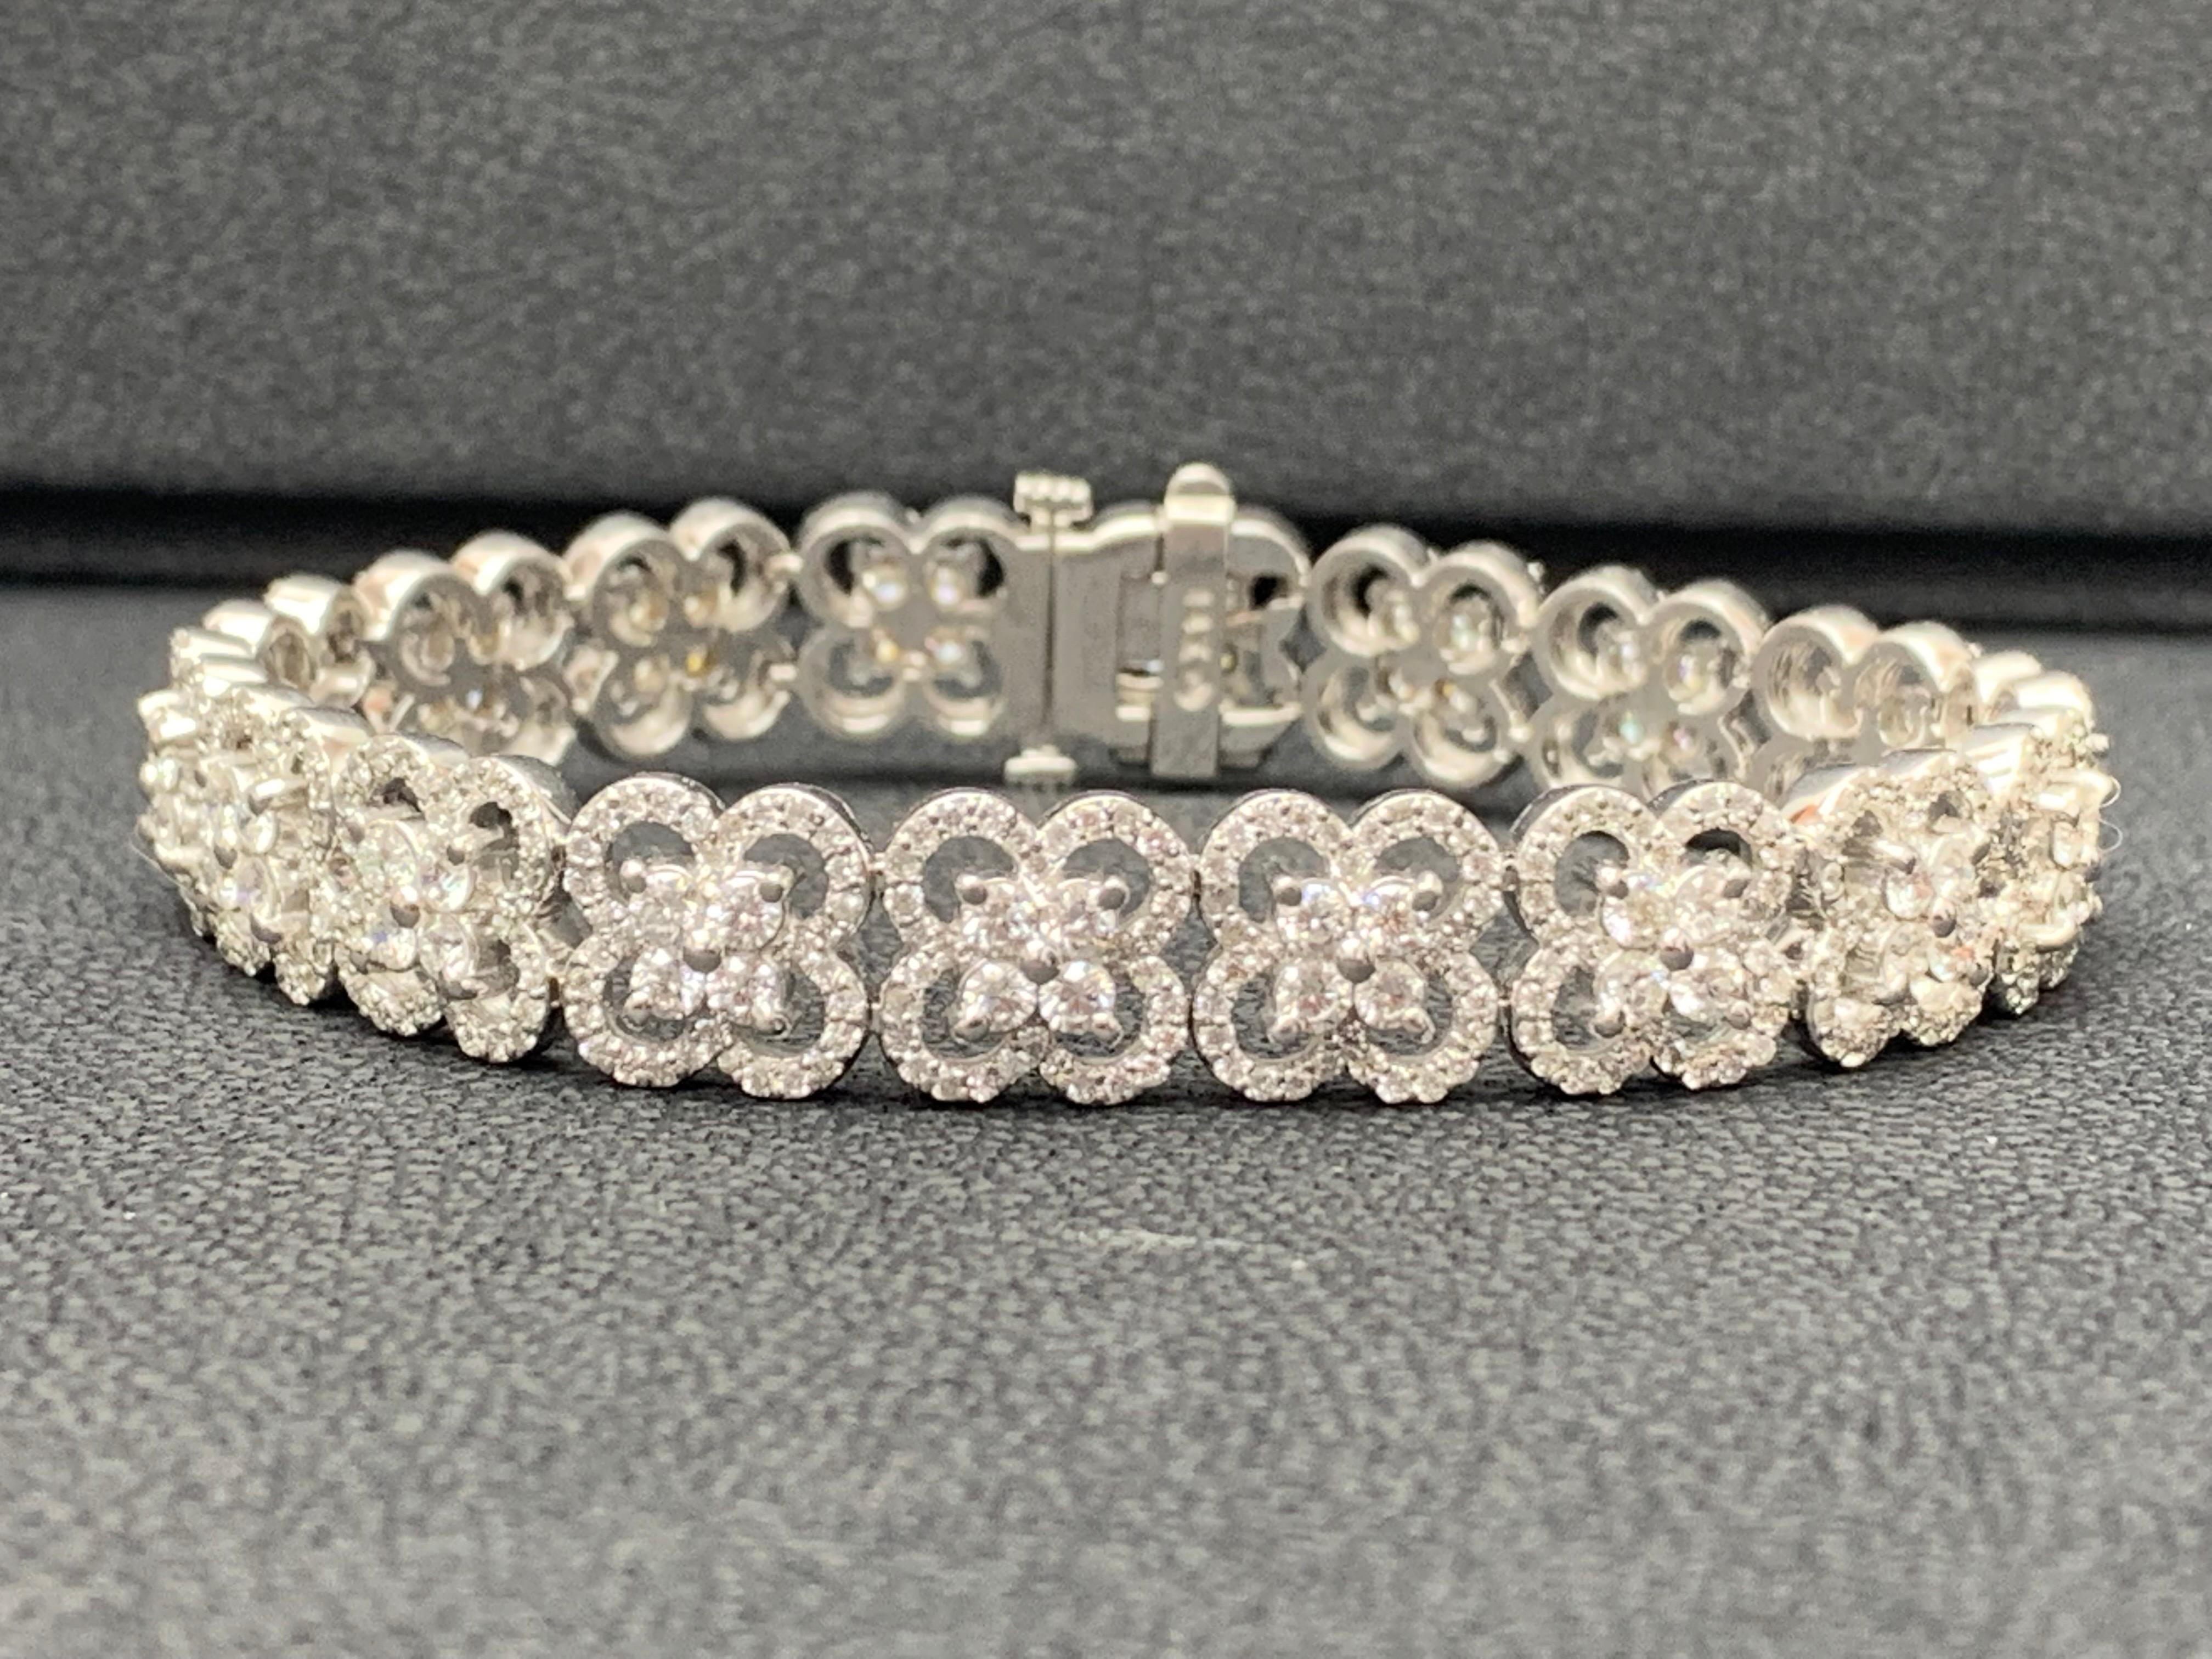 Bracelet set with round brilliants diamonds set in a floral motif. 640 Diamonds weigh 6.03 carats. Box clasp with double lock mechanism.
 
All diamonds are GH color SI1 Clarity.
Can be made in Yellow and Rose gold.
Style available in different price